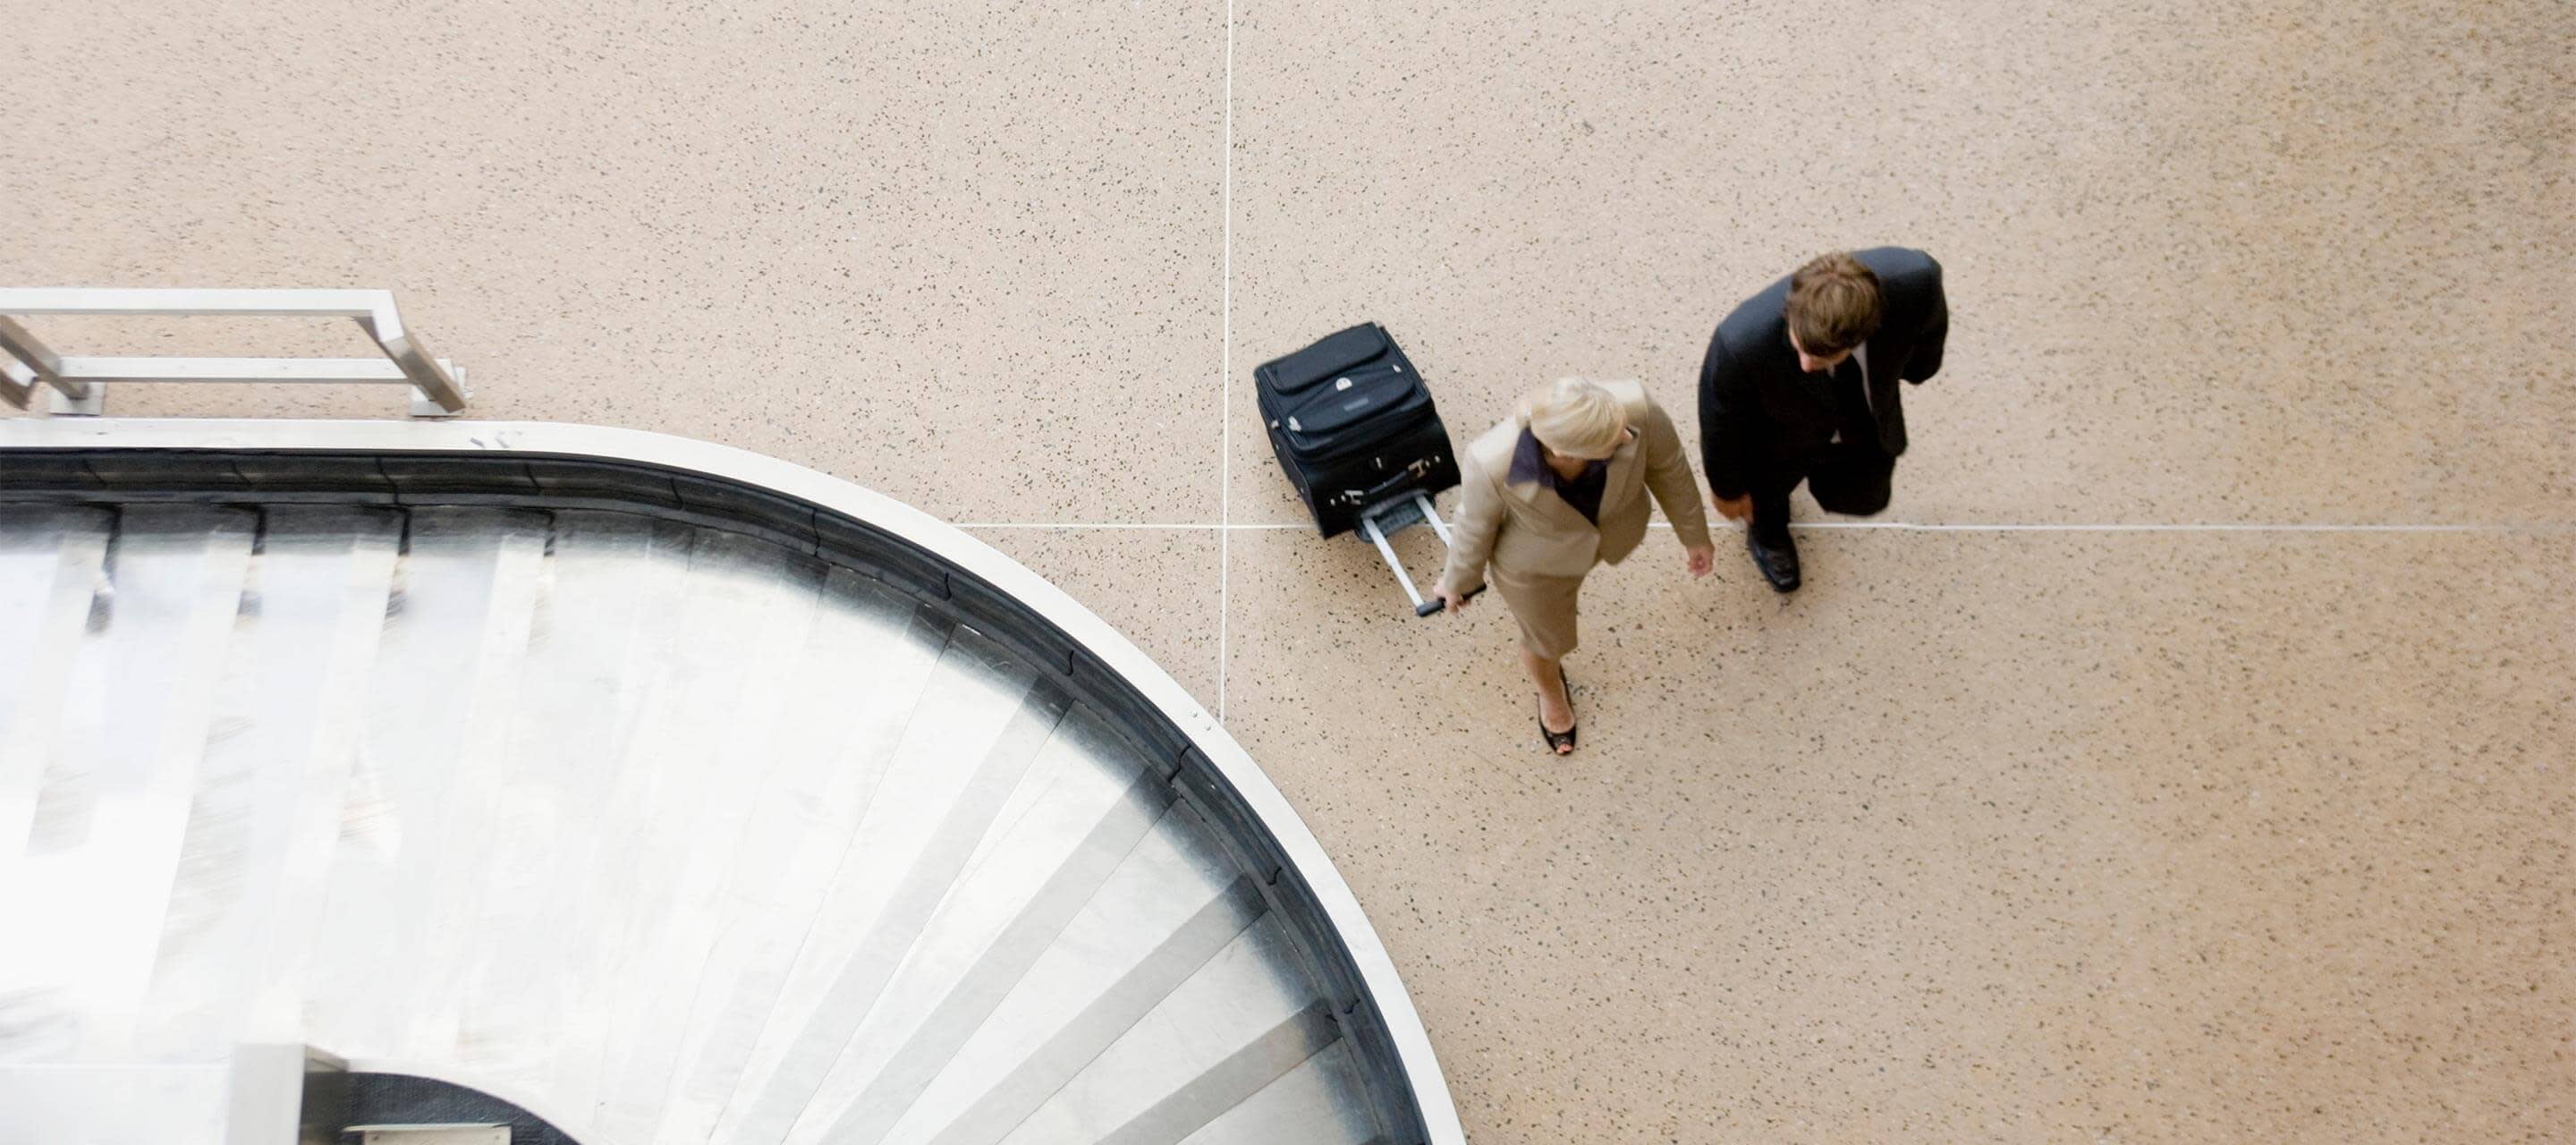 aerial view of two people walking through airport 